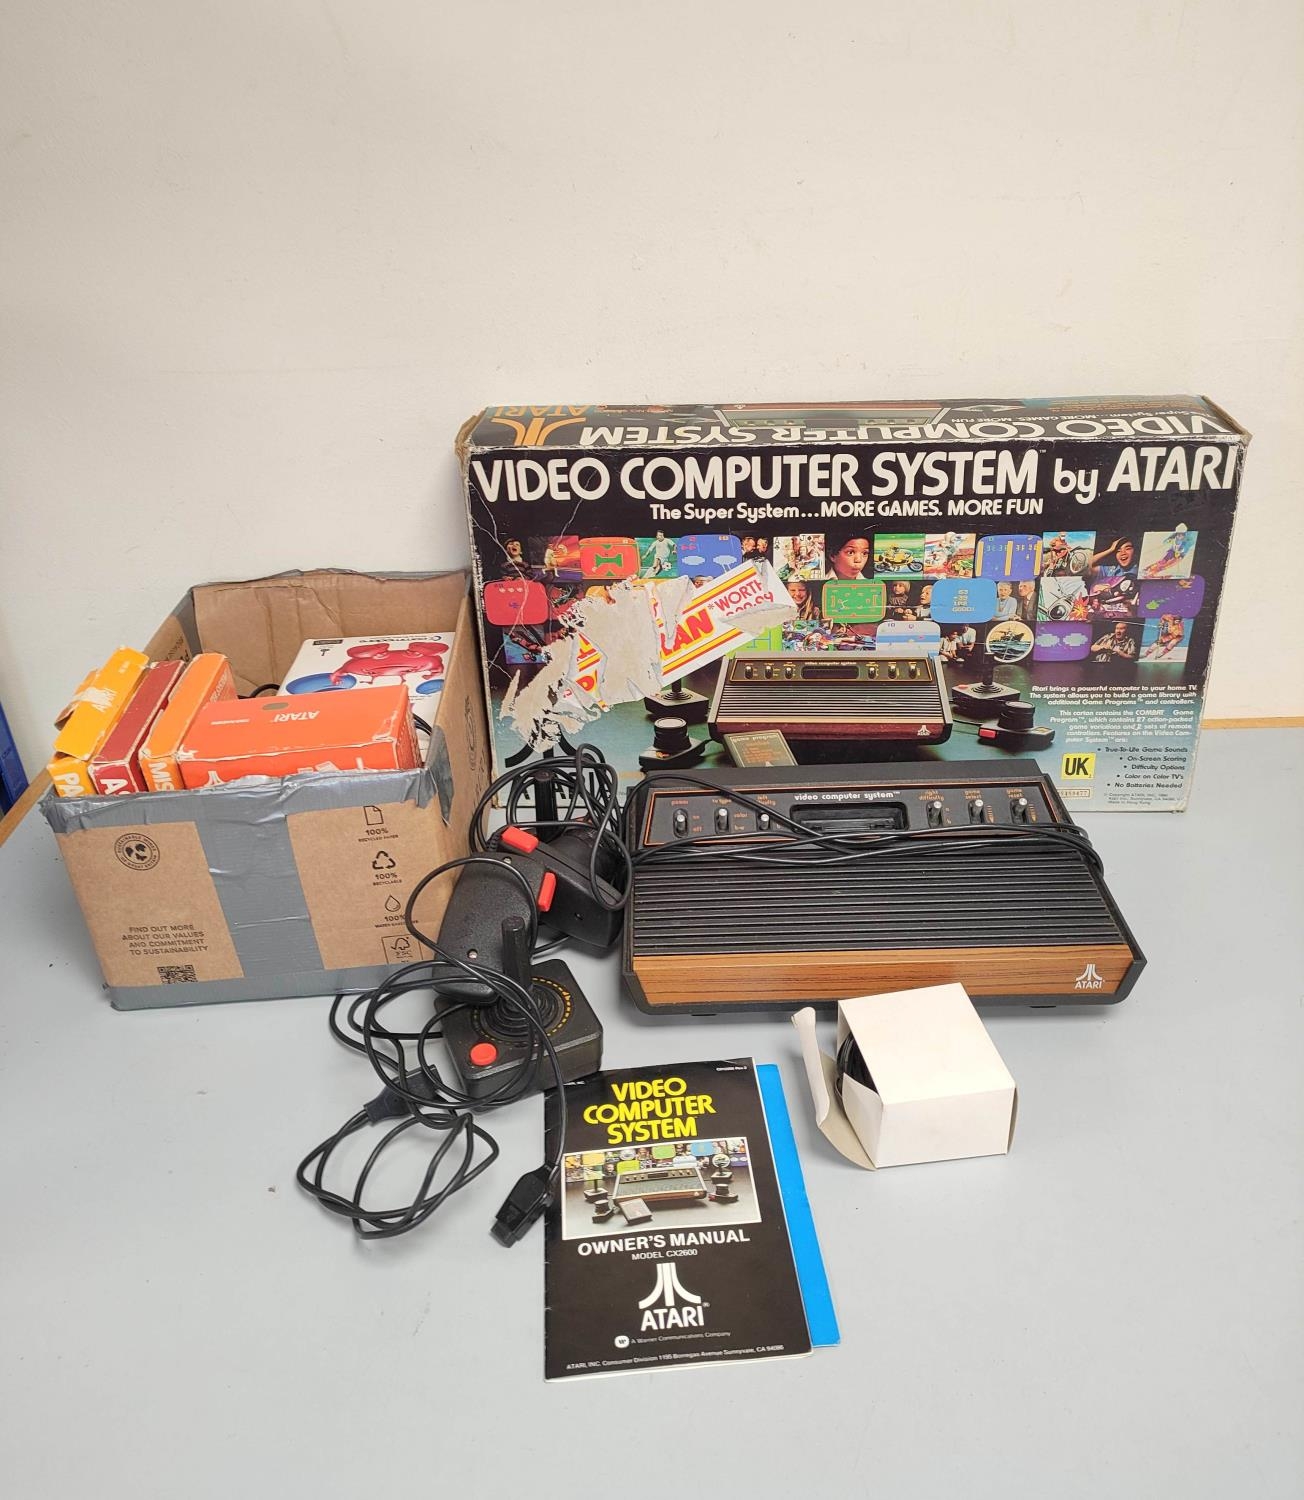 Boxed Atari video computer system, model CX-2600A with accessories and games to include Missile